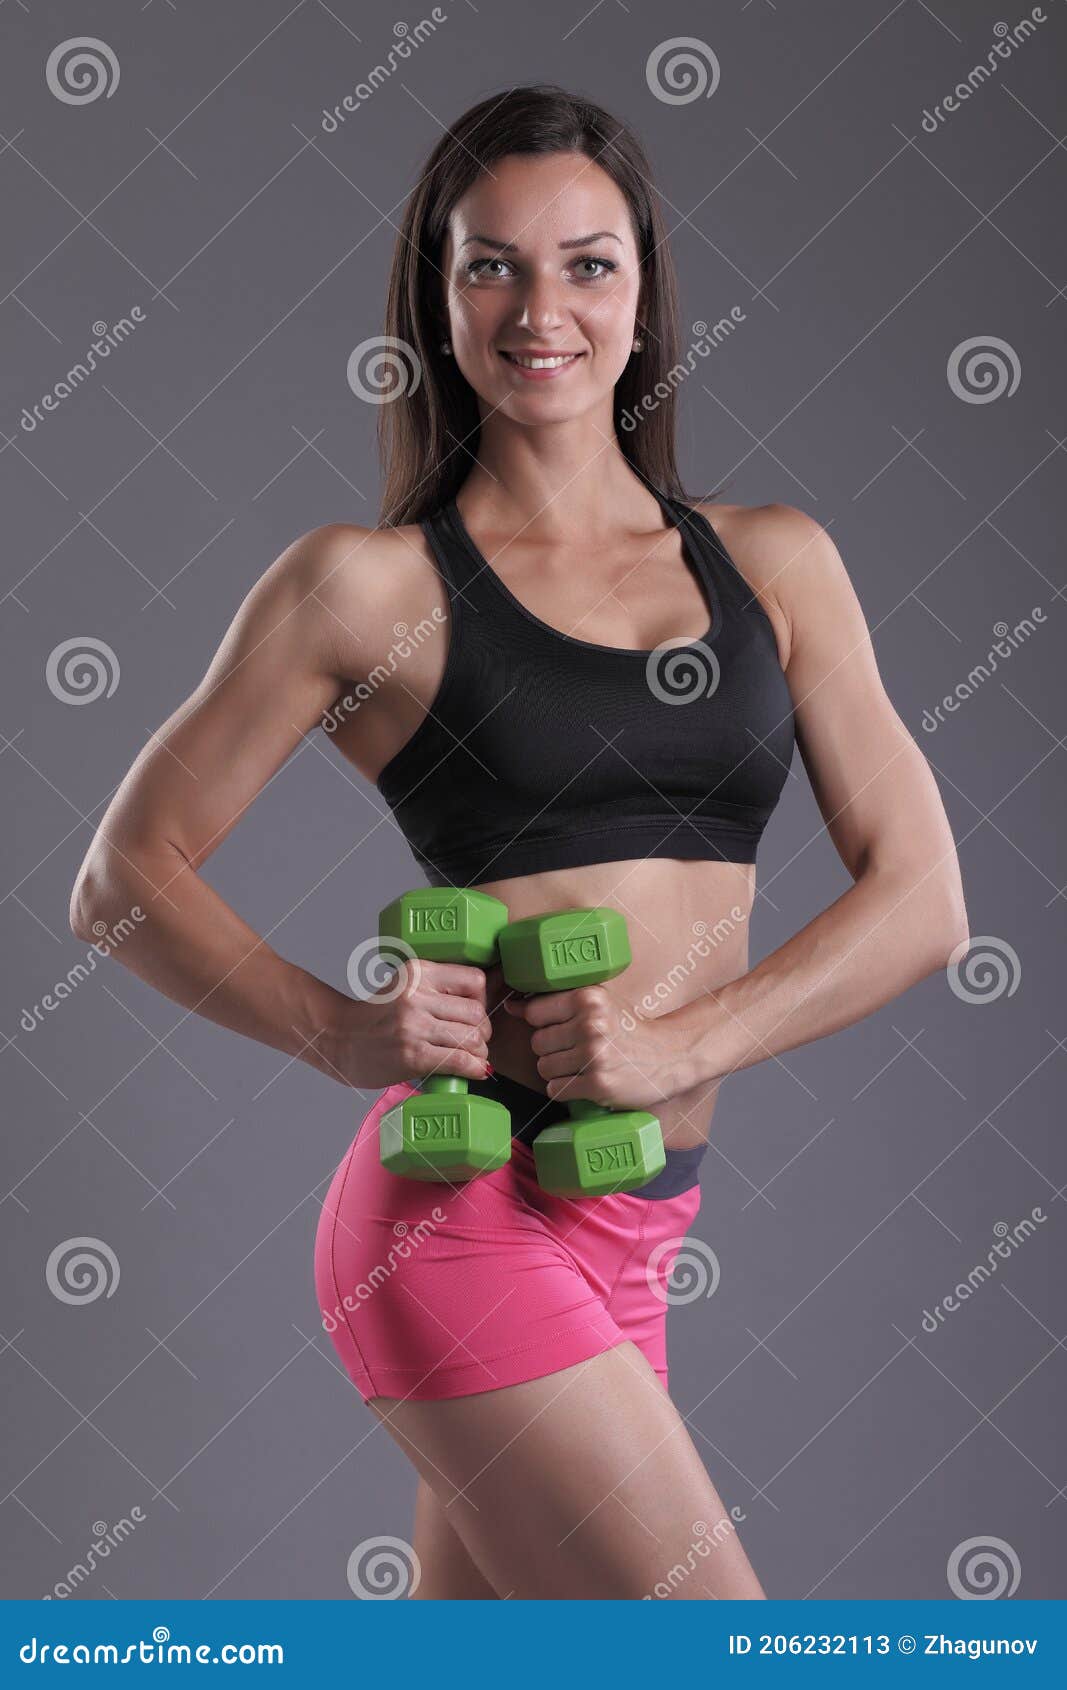 Fitness Woman In Doing Exercises With Dumbells Stock Image Image Of Naked Lifting 206232113 